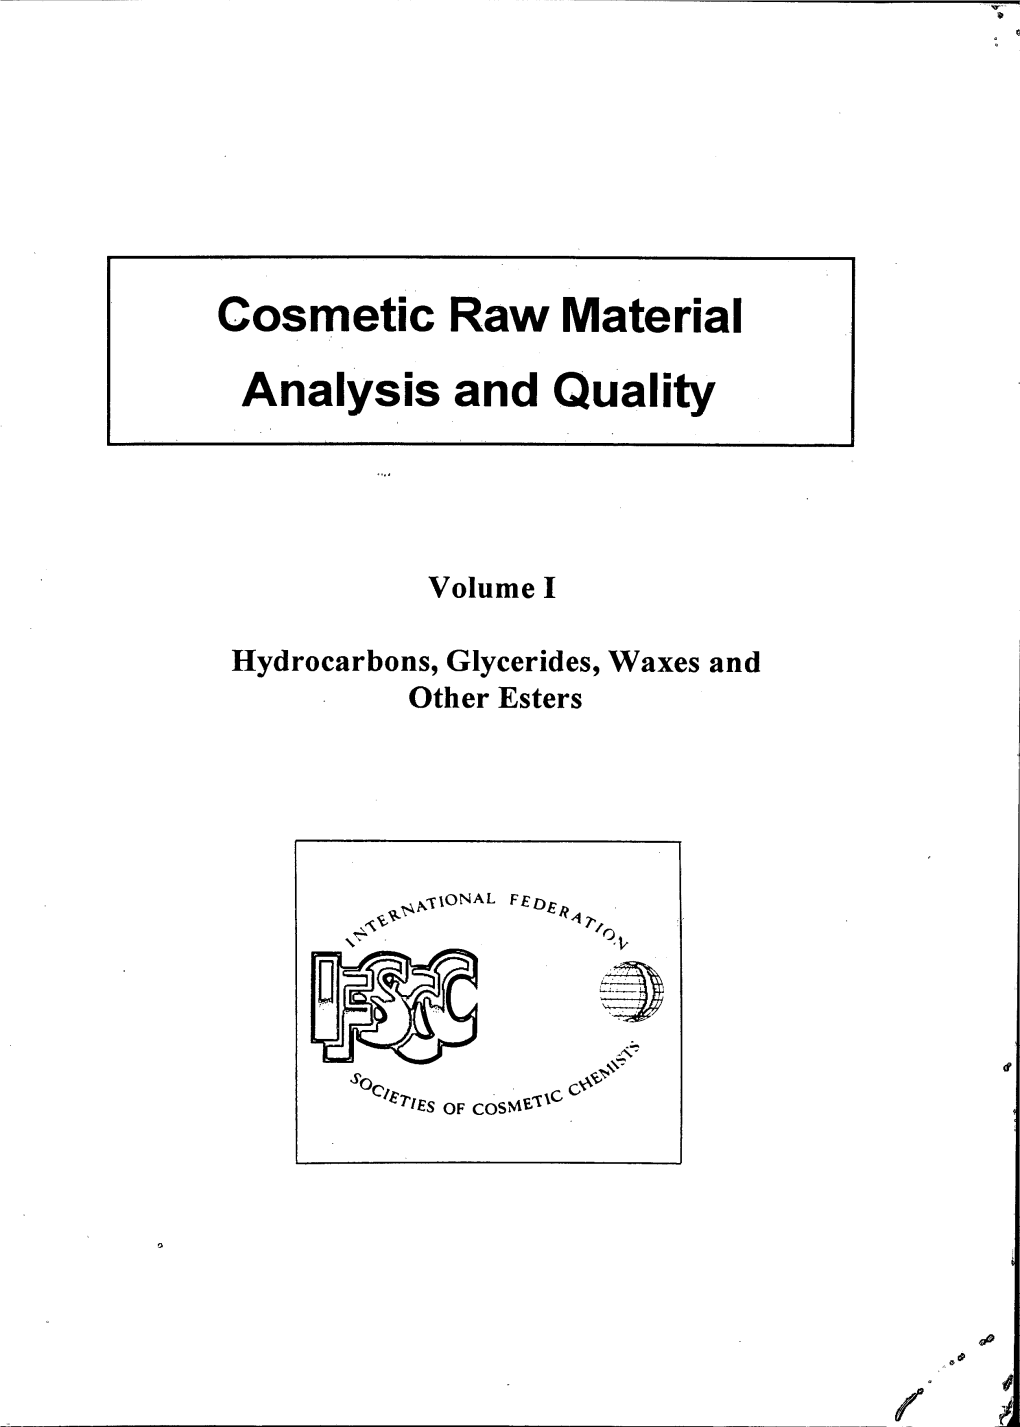 Cosmetic Raw Material Analysis and Quality